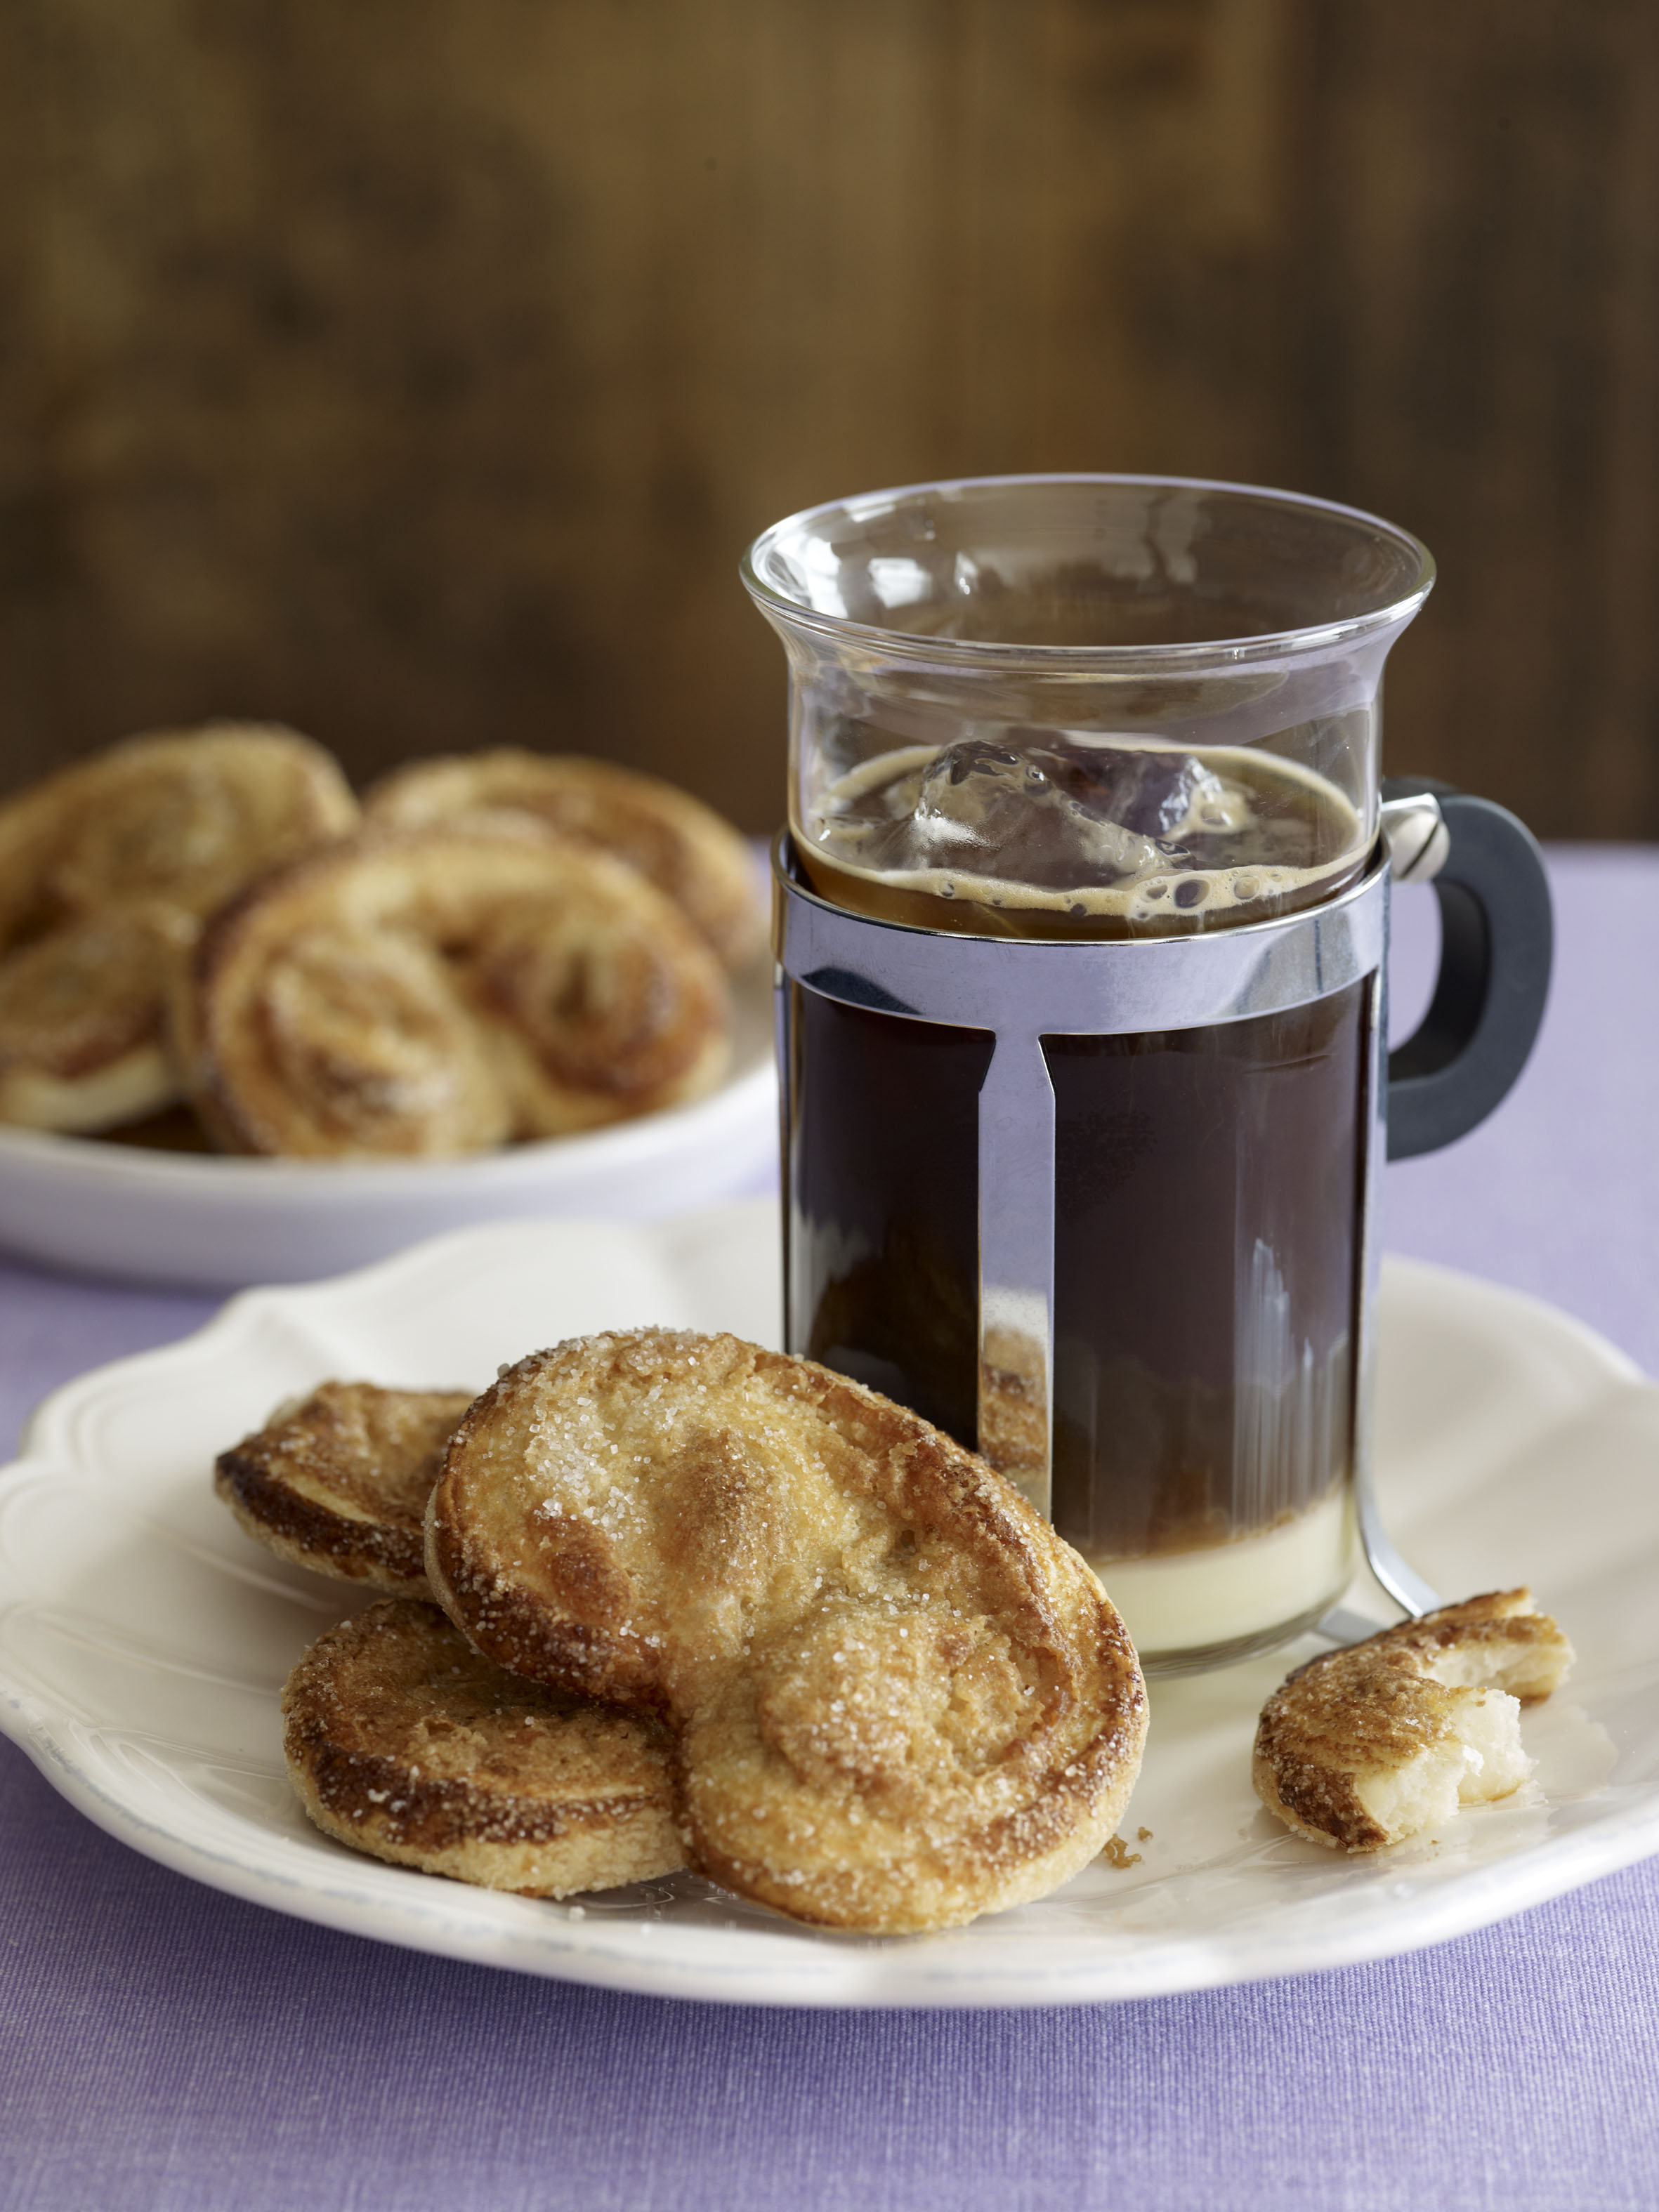 Iced Coffe and Palmiers